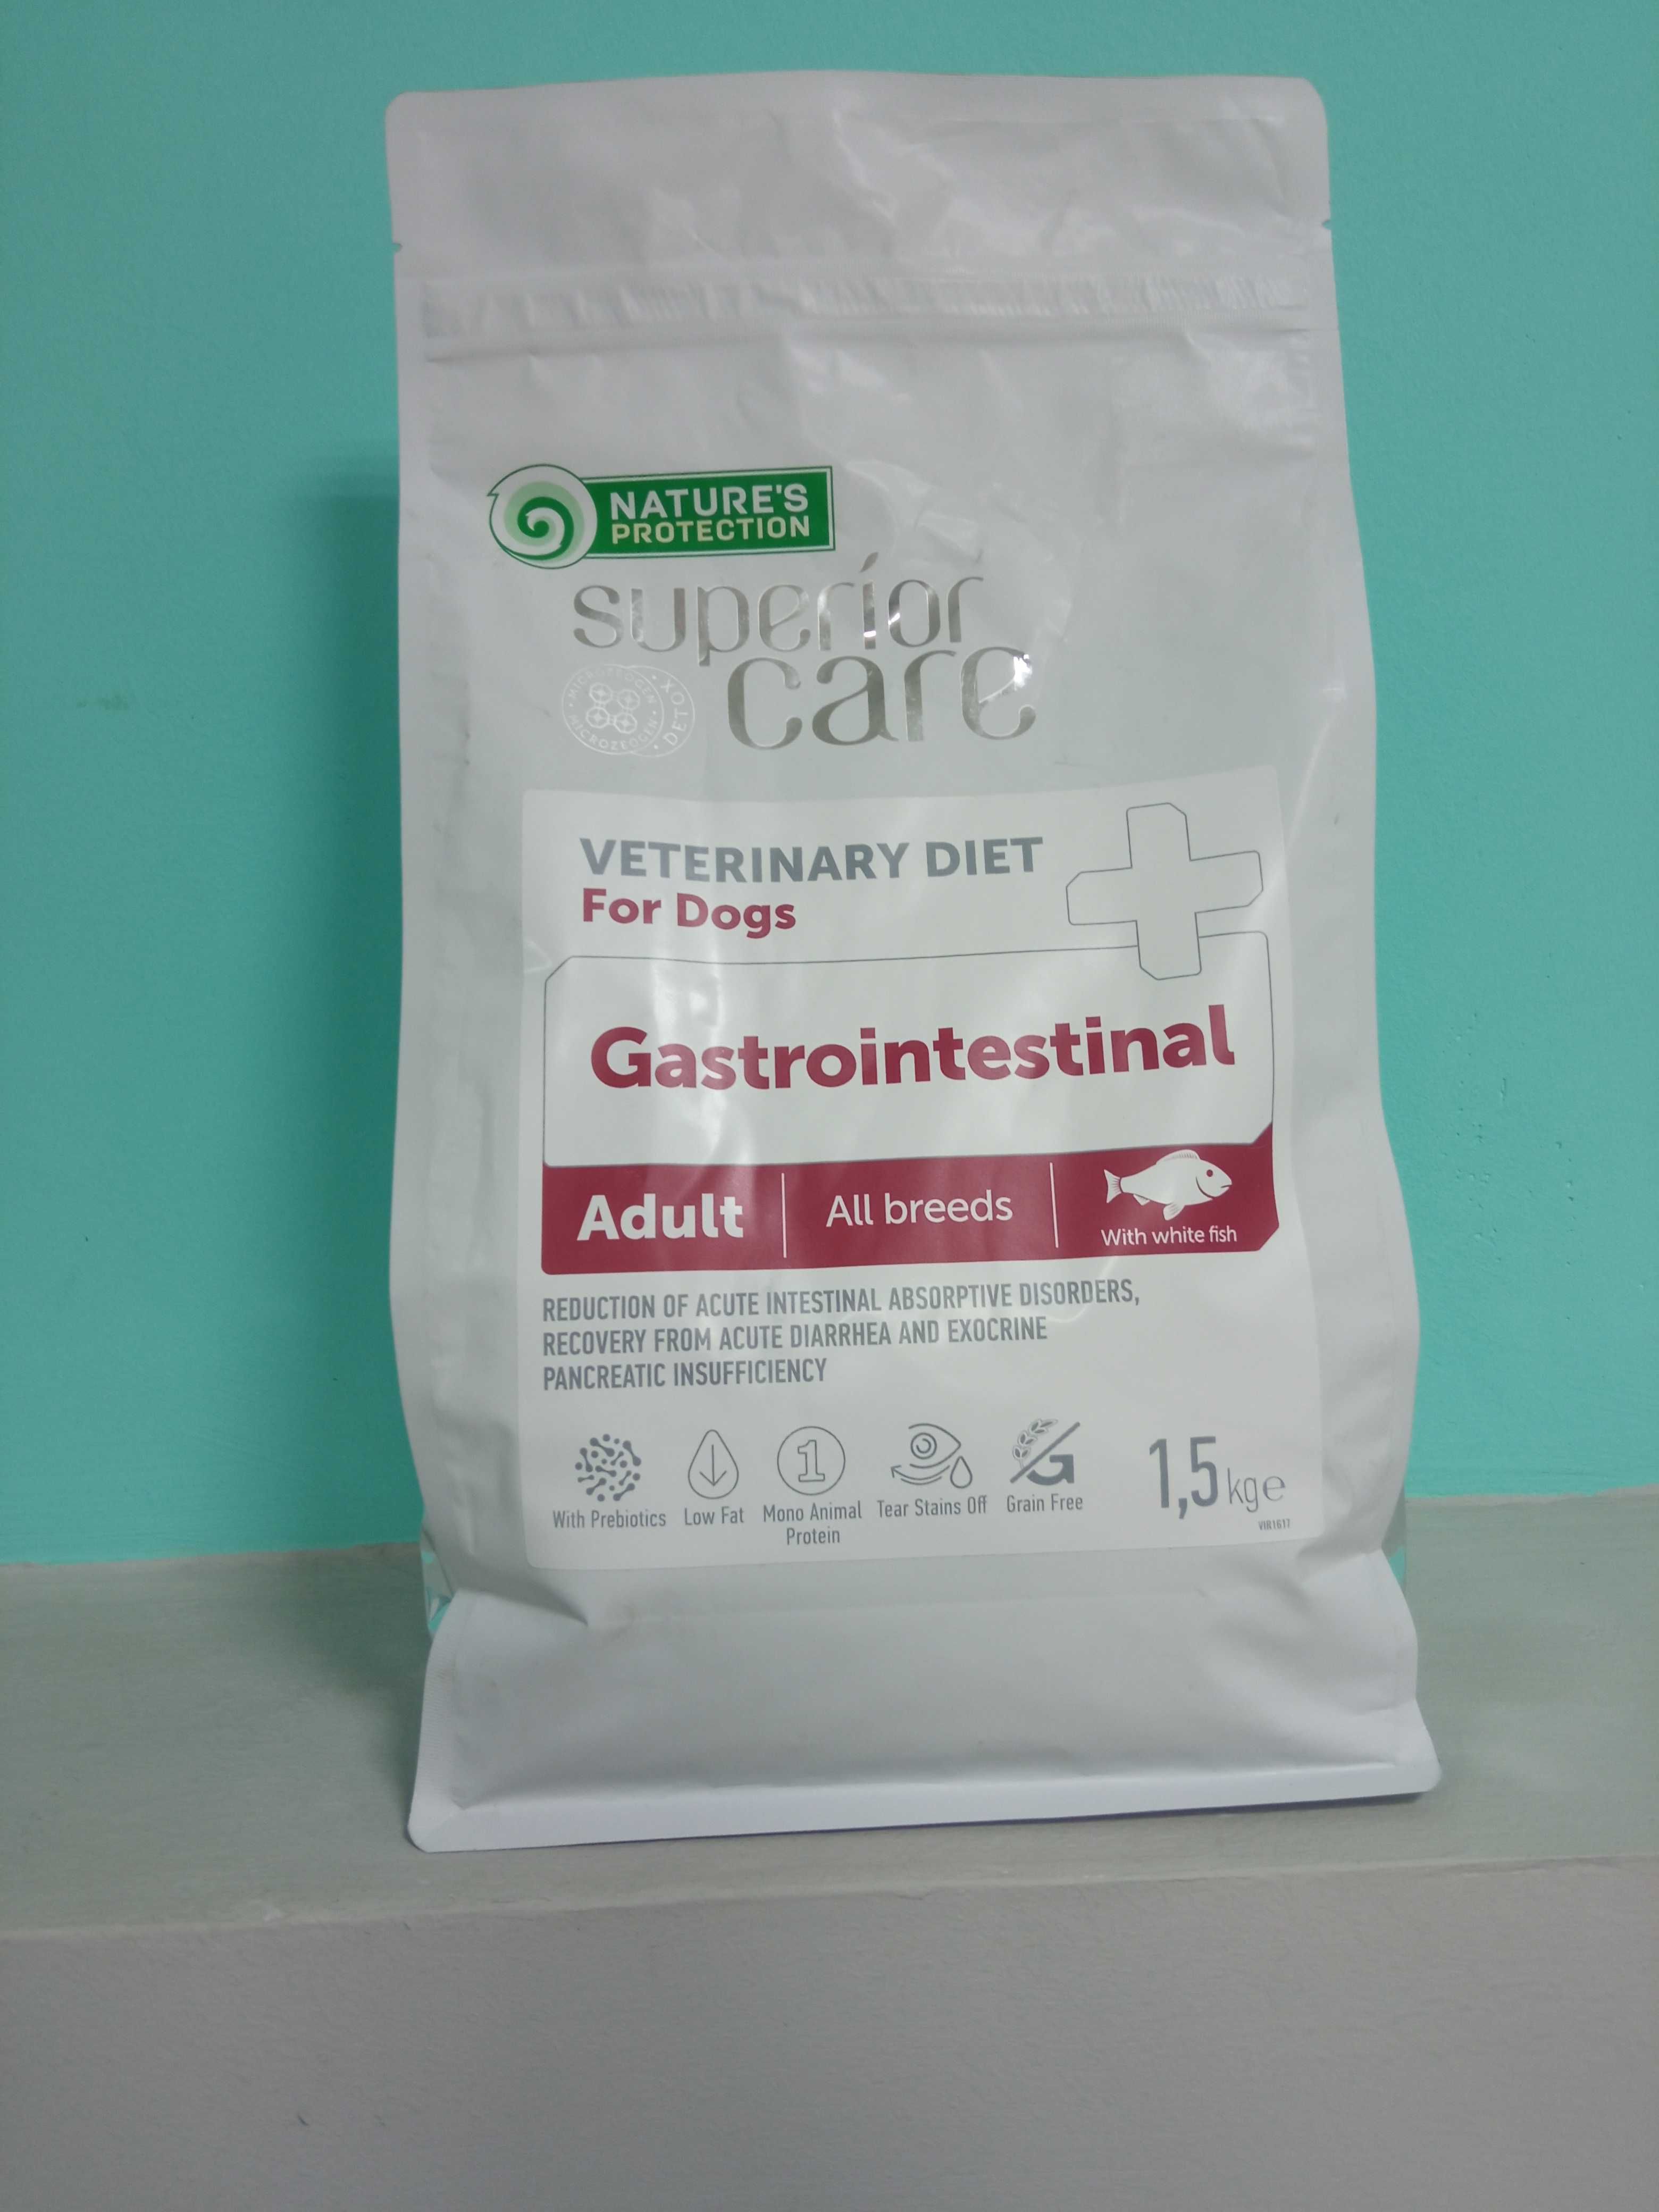 Nature's Protection Superior Care Veterinary Diet Gastrointestinal